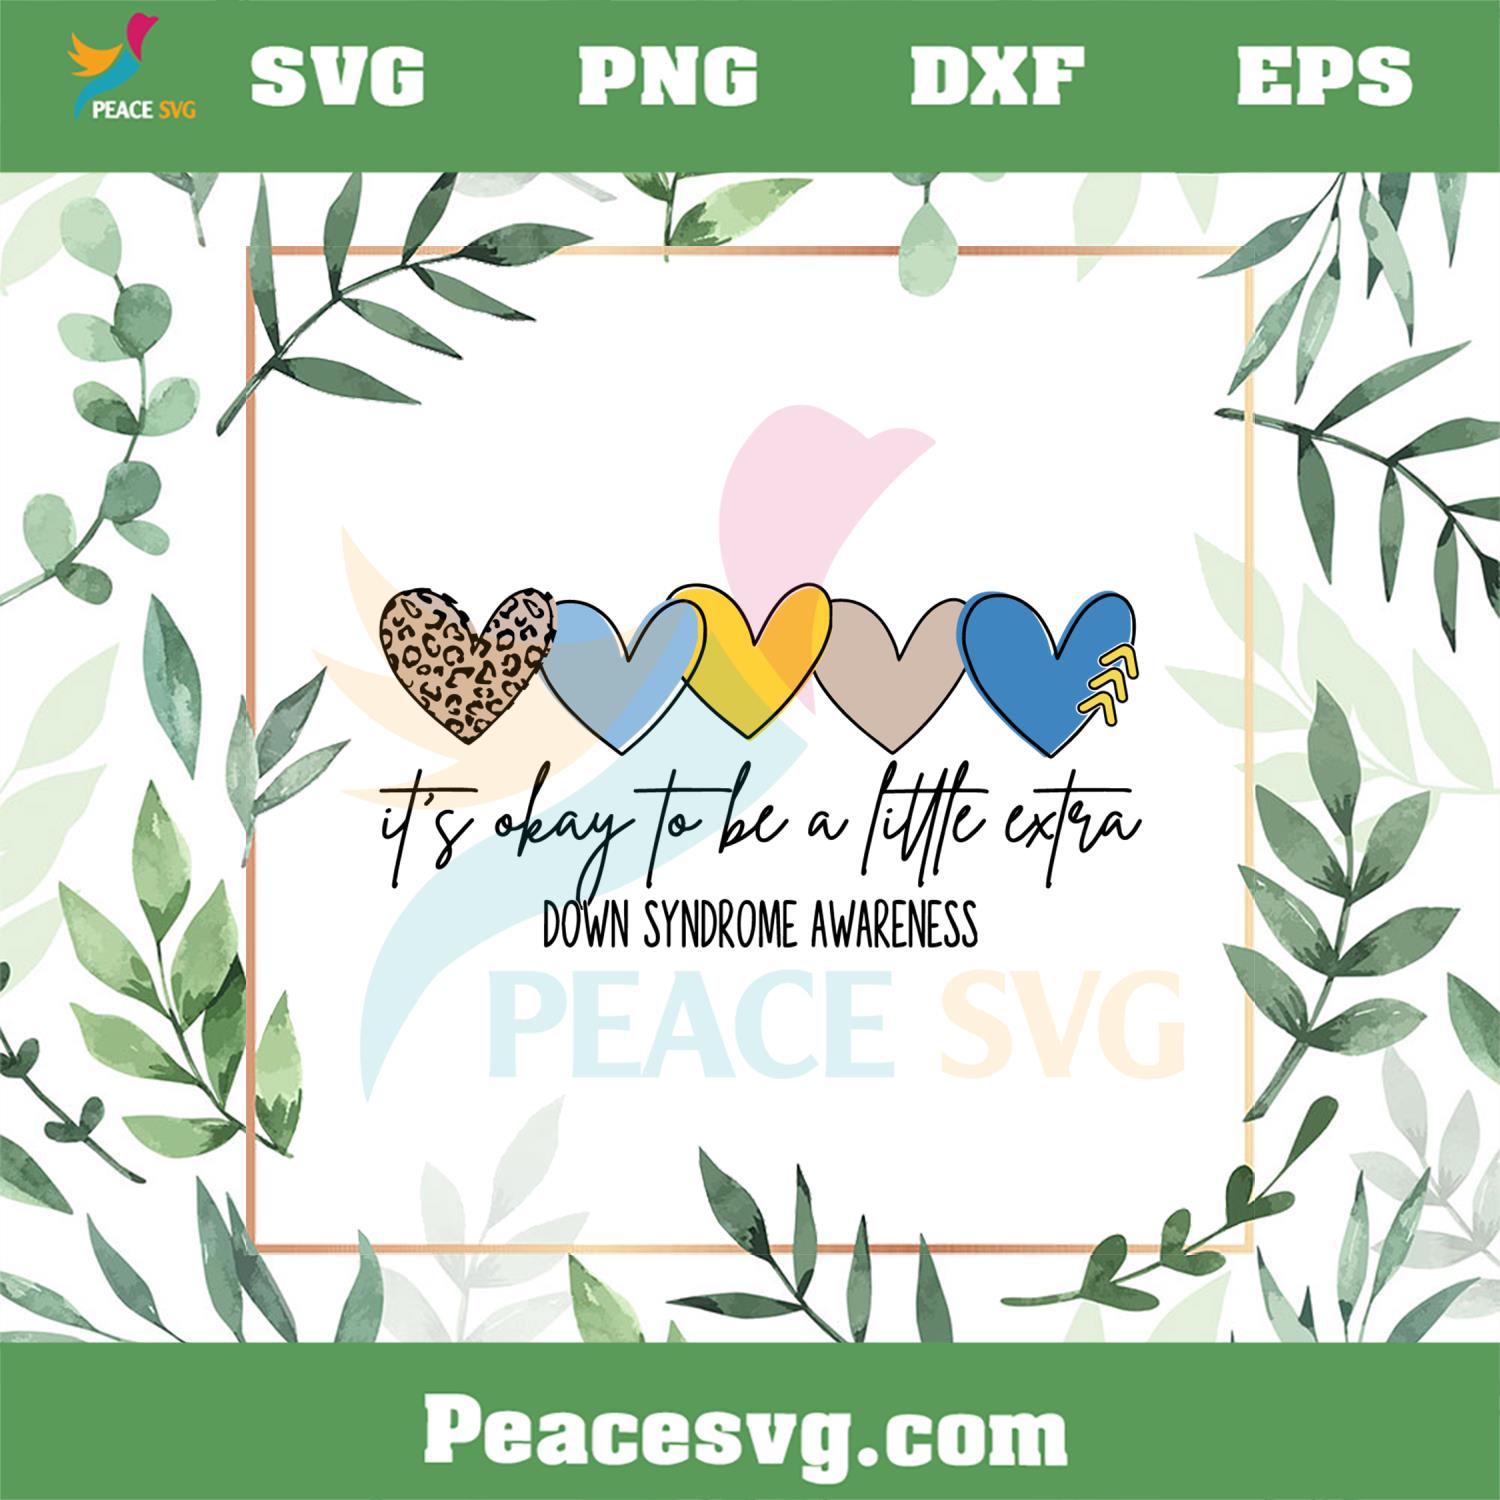 It’s Okay To Be A Little Extra Down Syndrome Awareness Svg Cutting Files